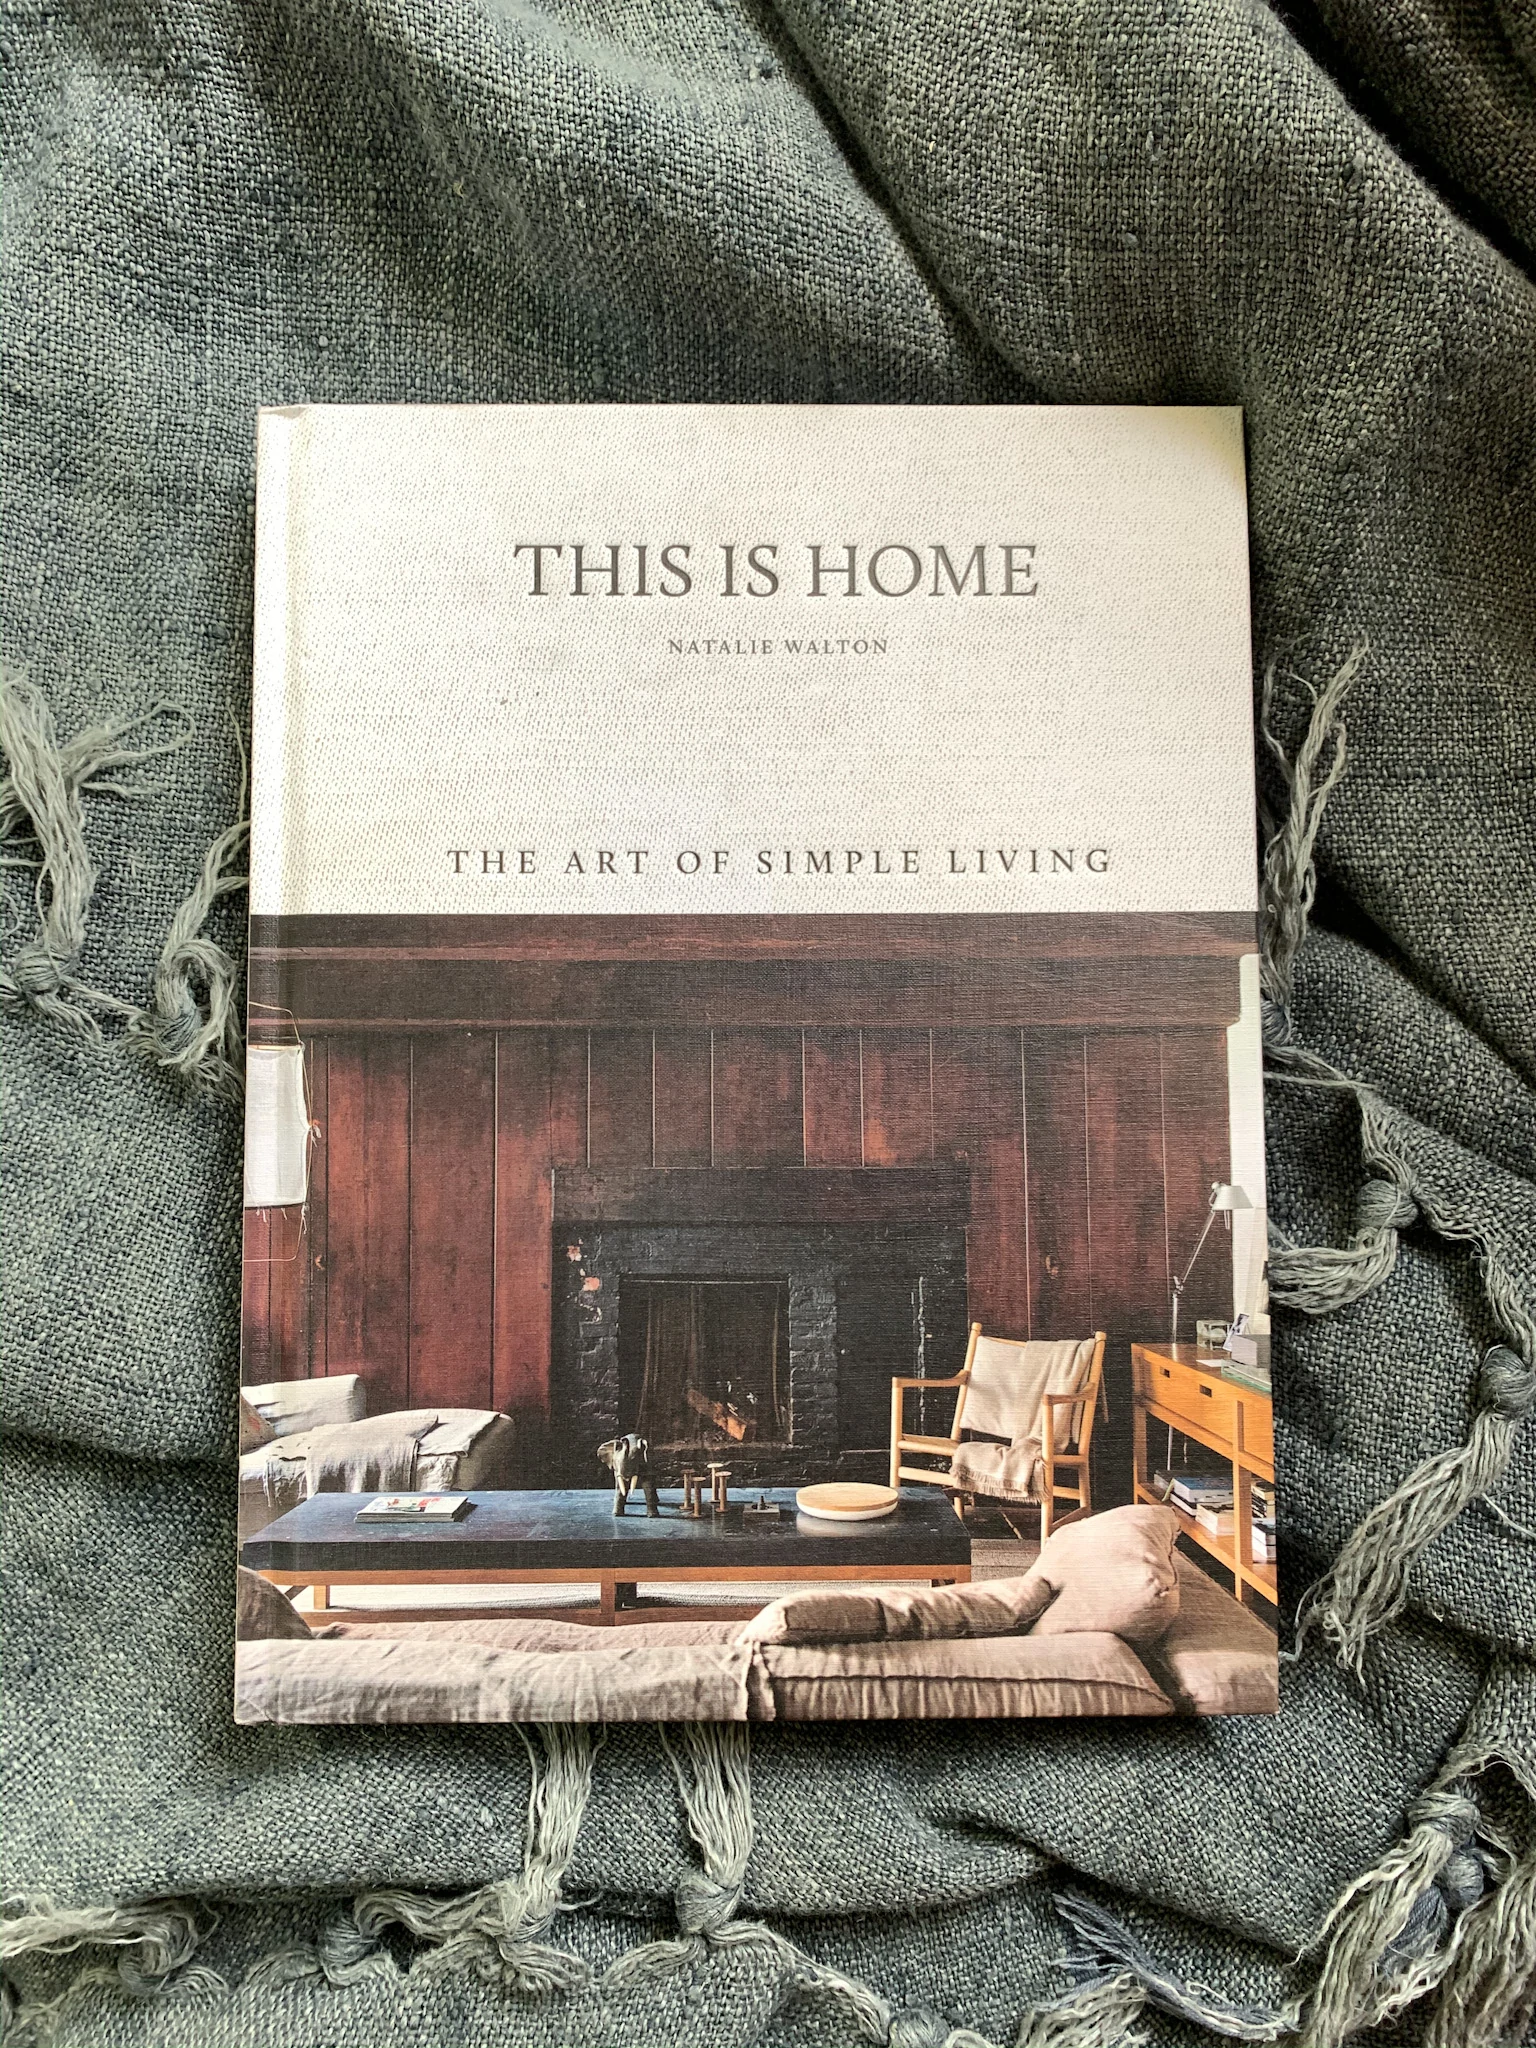 This is Home- The Art of Simple Living [By Natalie Walton]